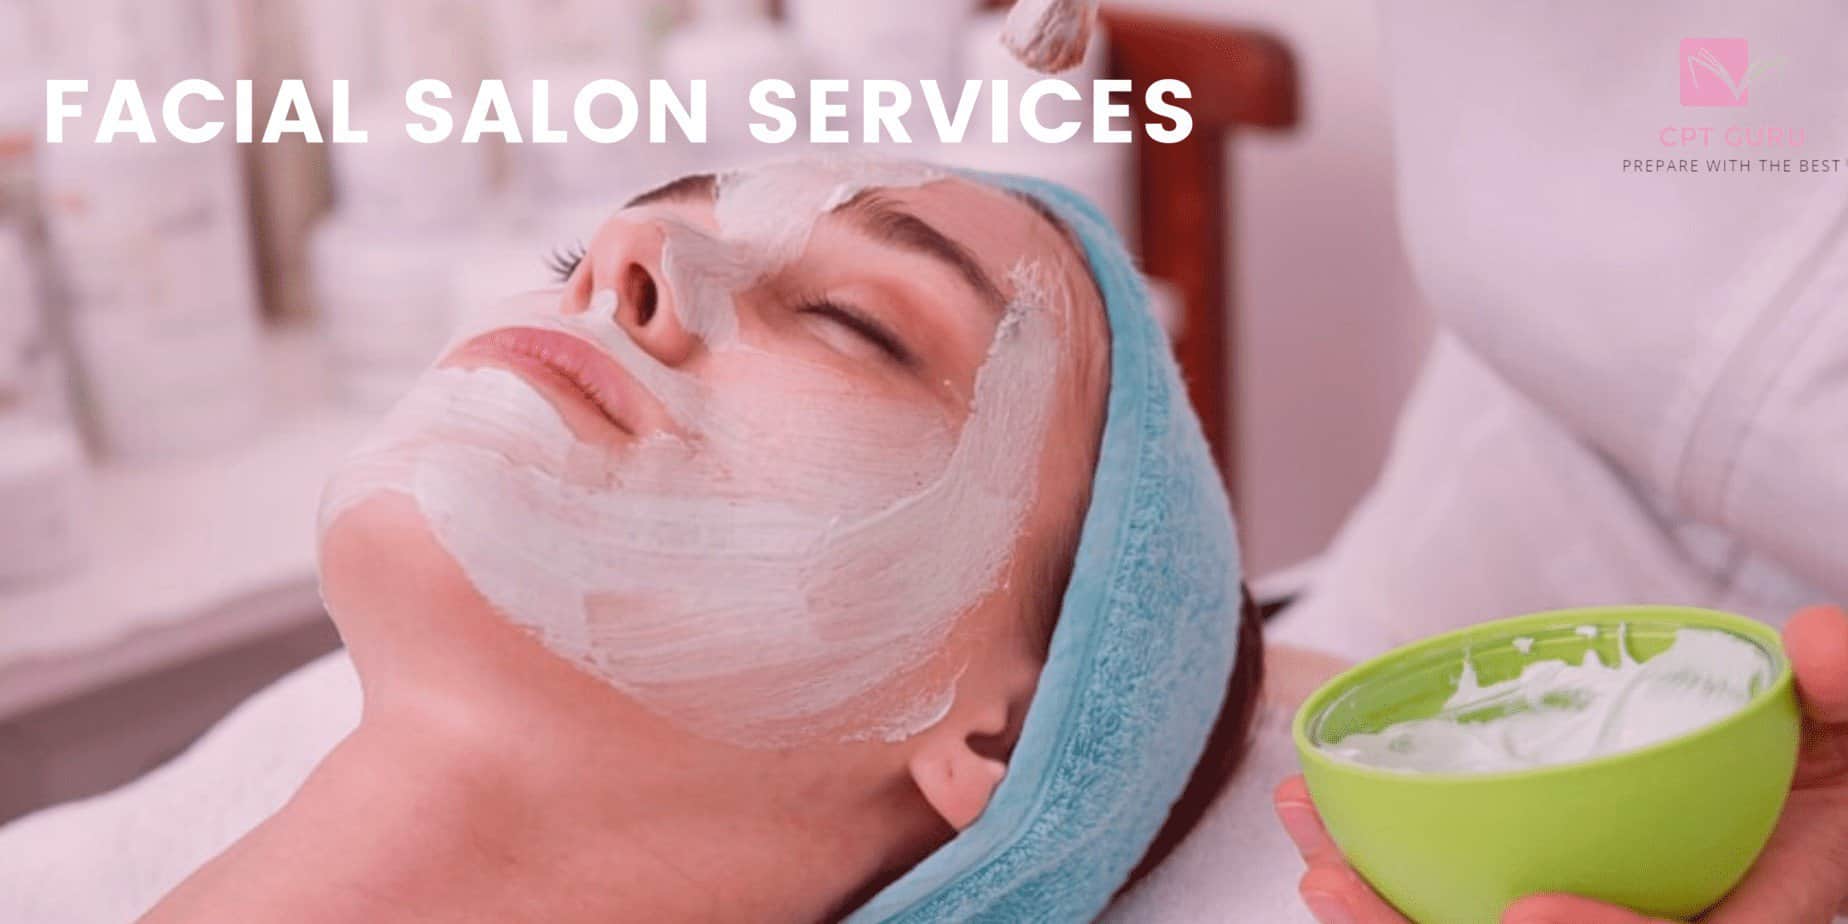 Facial services in beauty salons